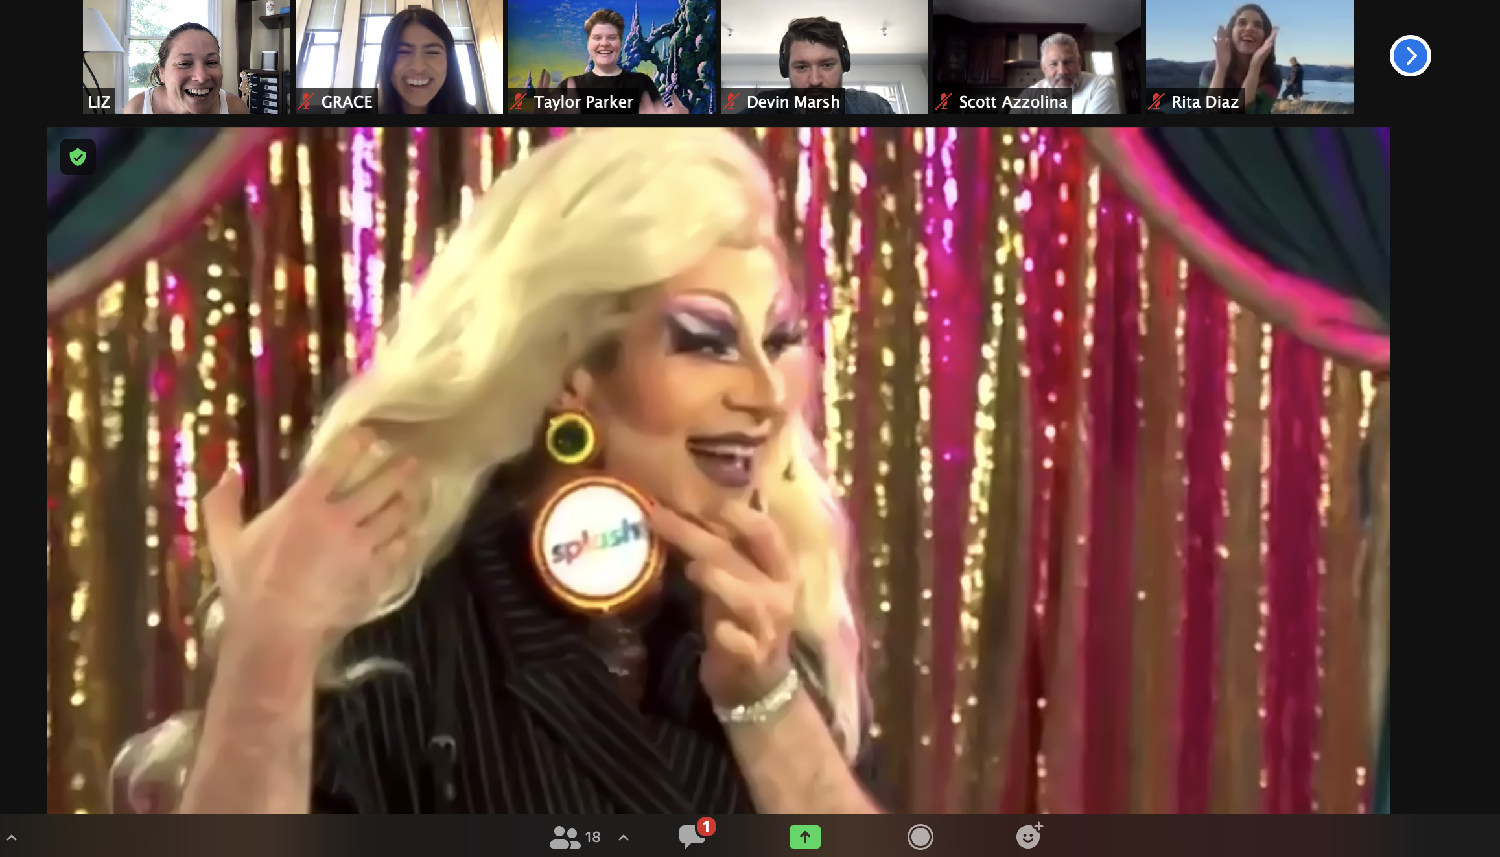 We kicked off PRIDE 2021 with our SP-LGBTQ+ ERG hosting a Sangria Secrets w/Drag Queens from Portugal virtual event!